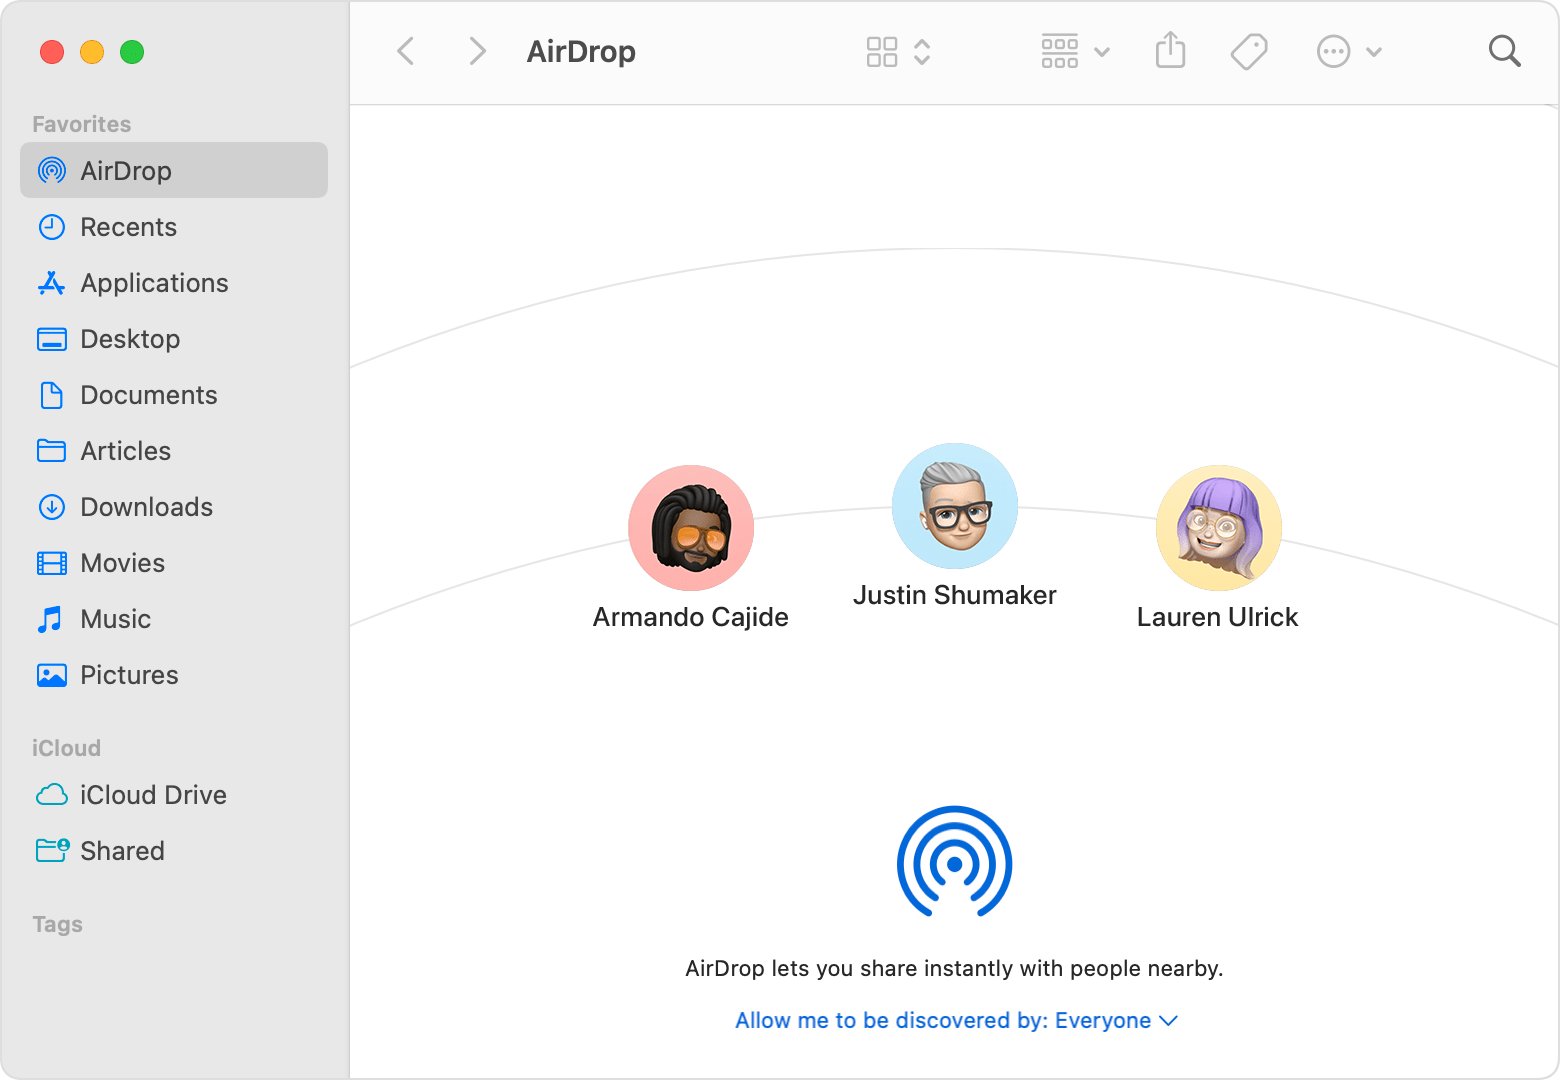 airdrop-what-it-is-how-to-turn-it-on-to-share-files-photos-on-iphone-ipad-mac